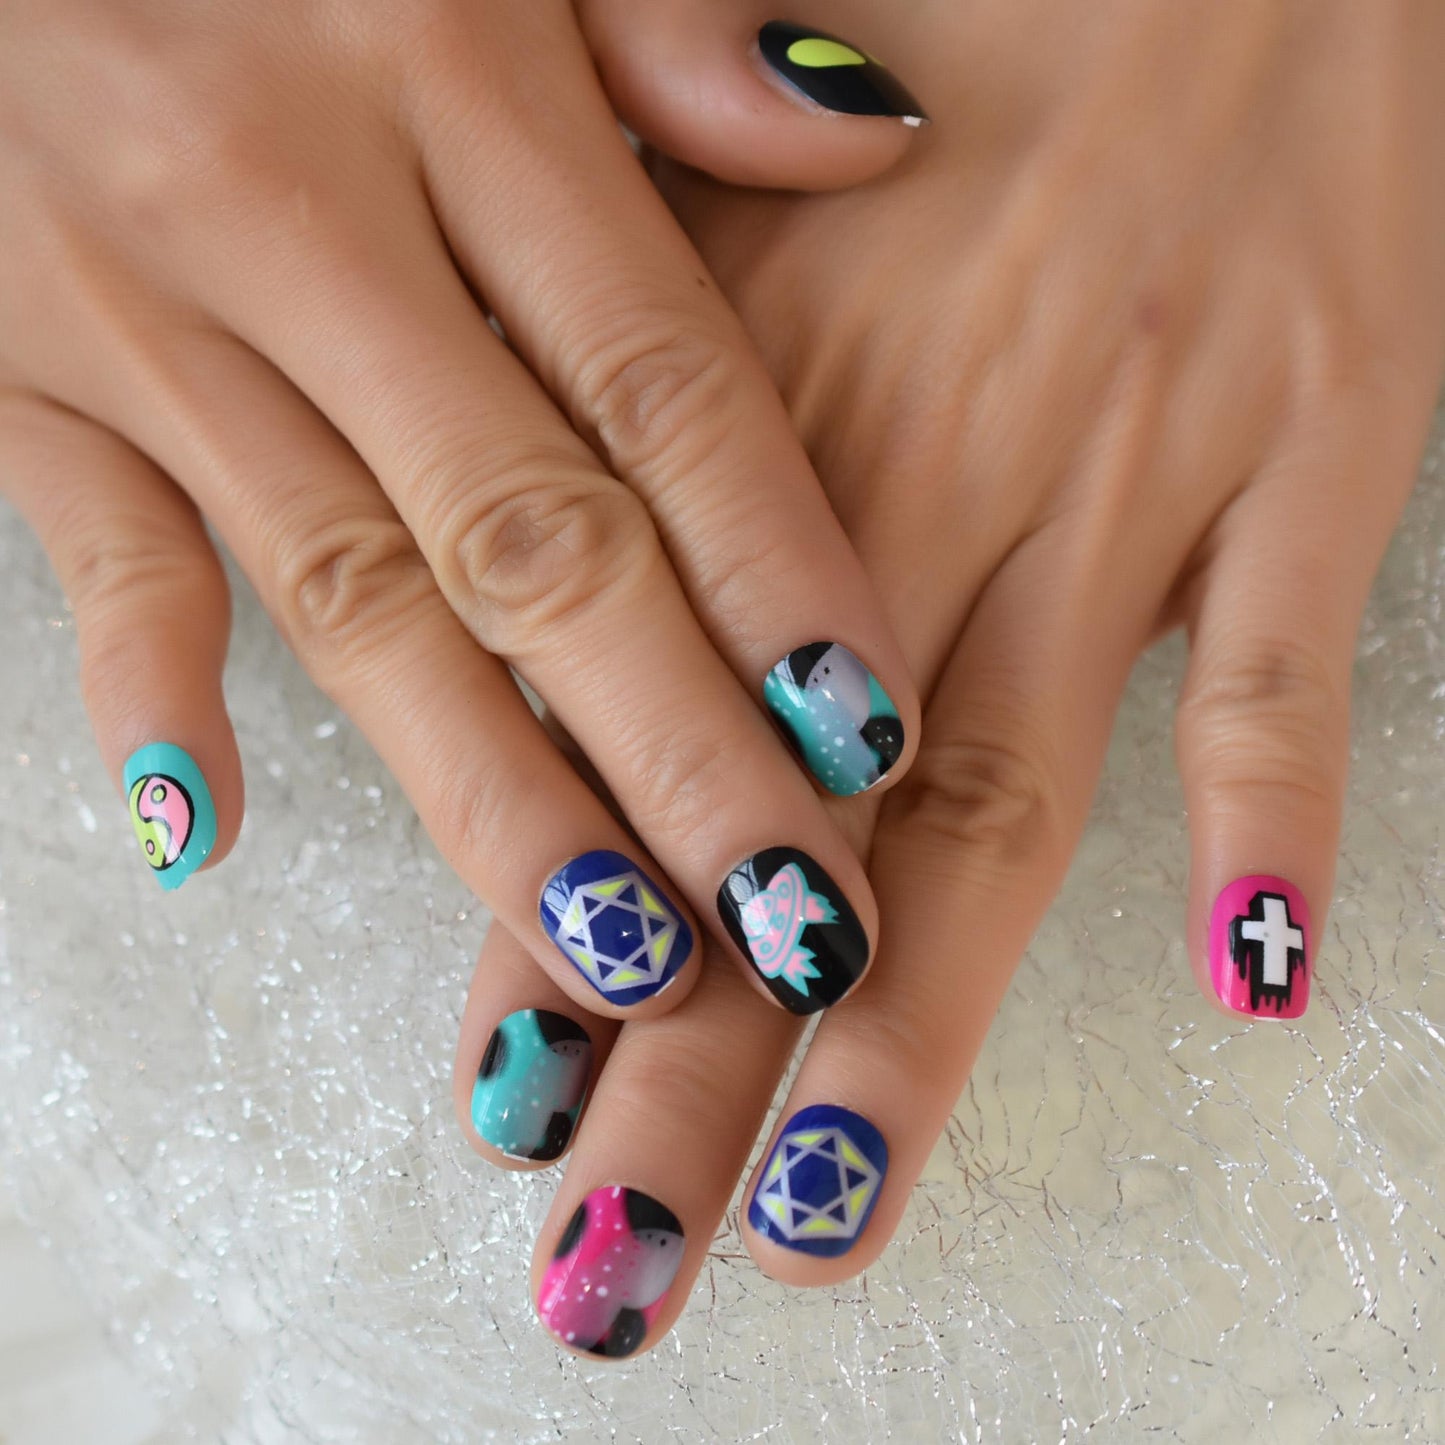 Colorful Fake Nail With Cartoons Pattern